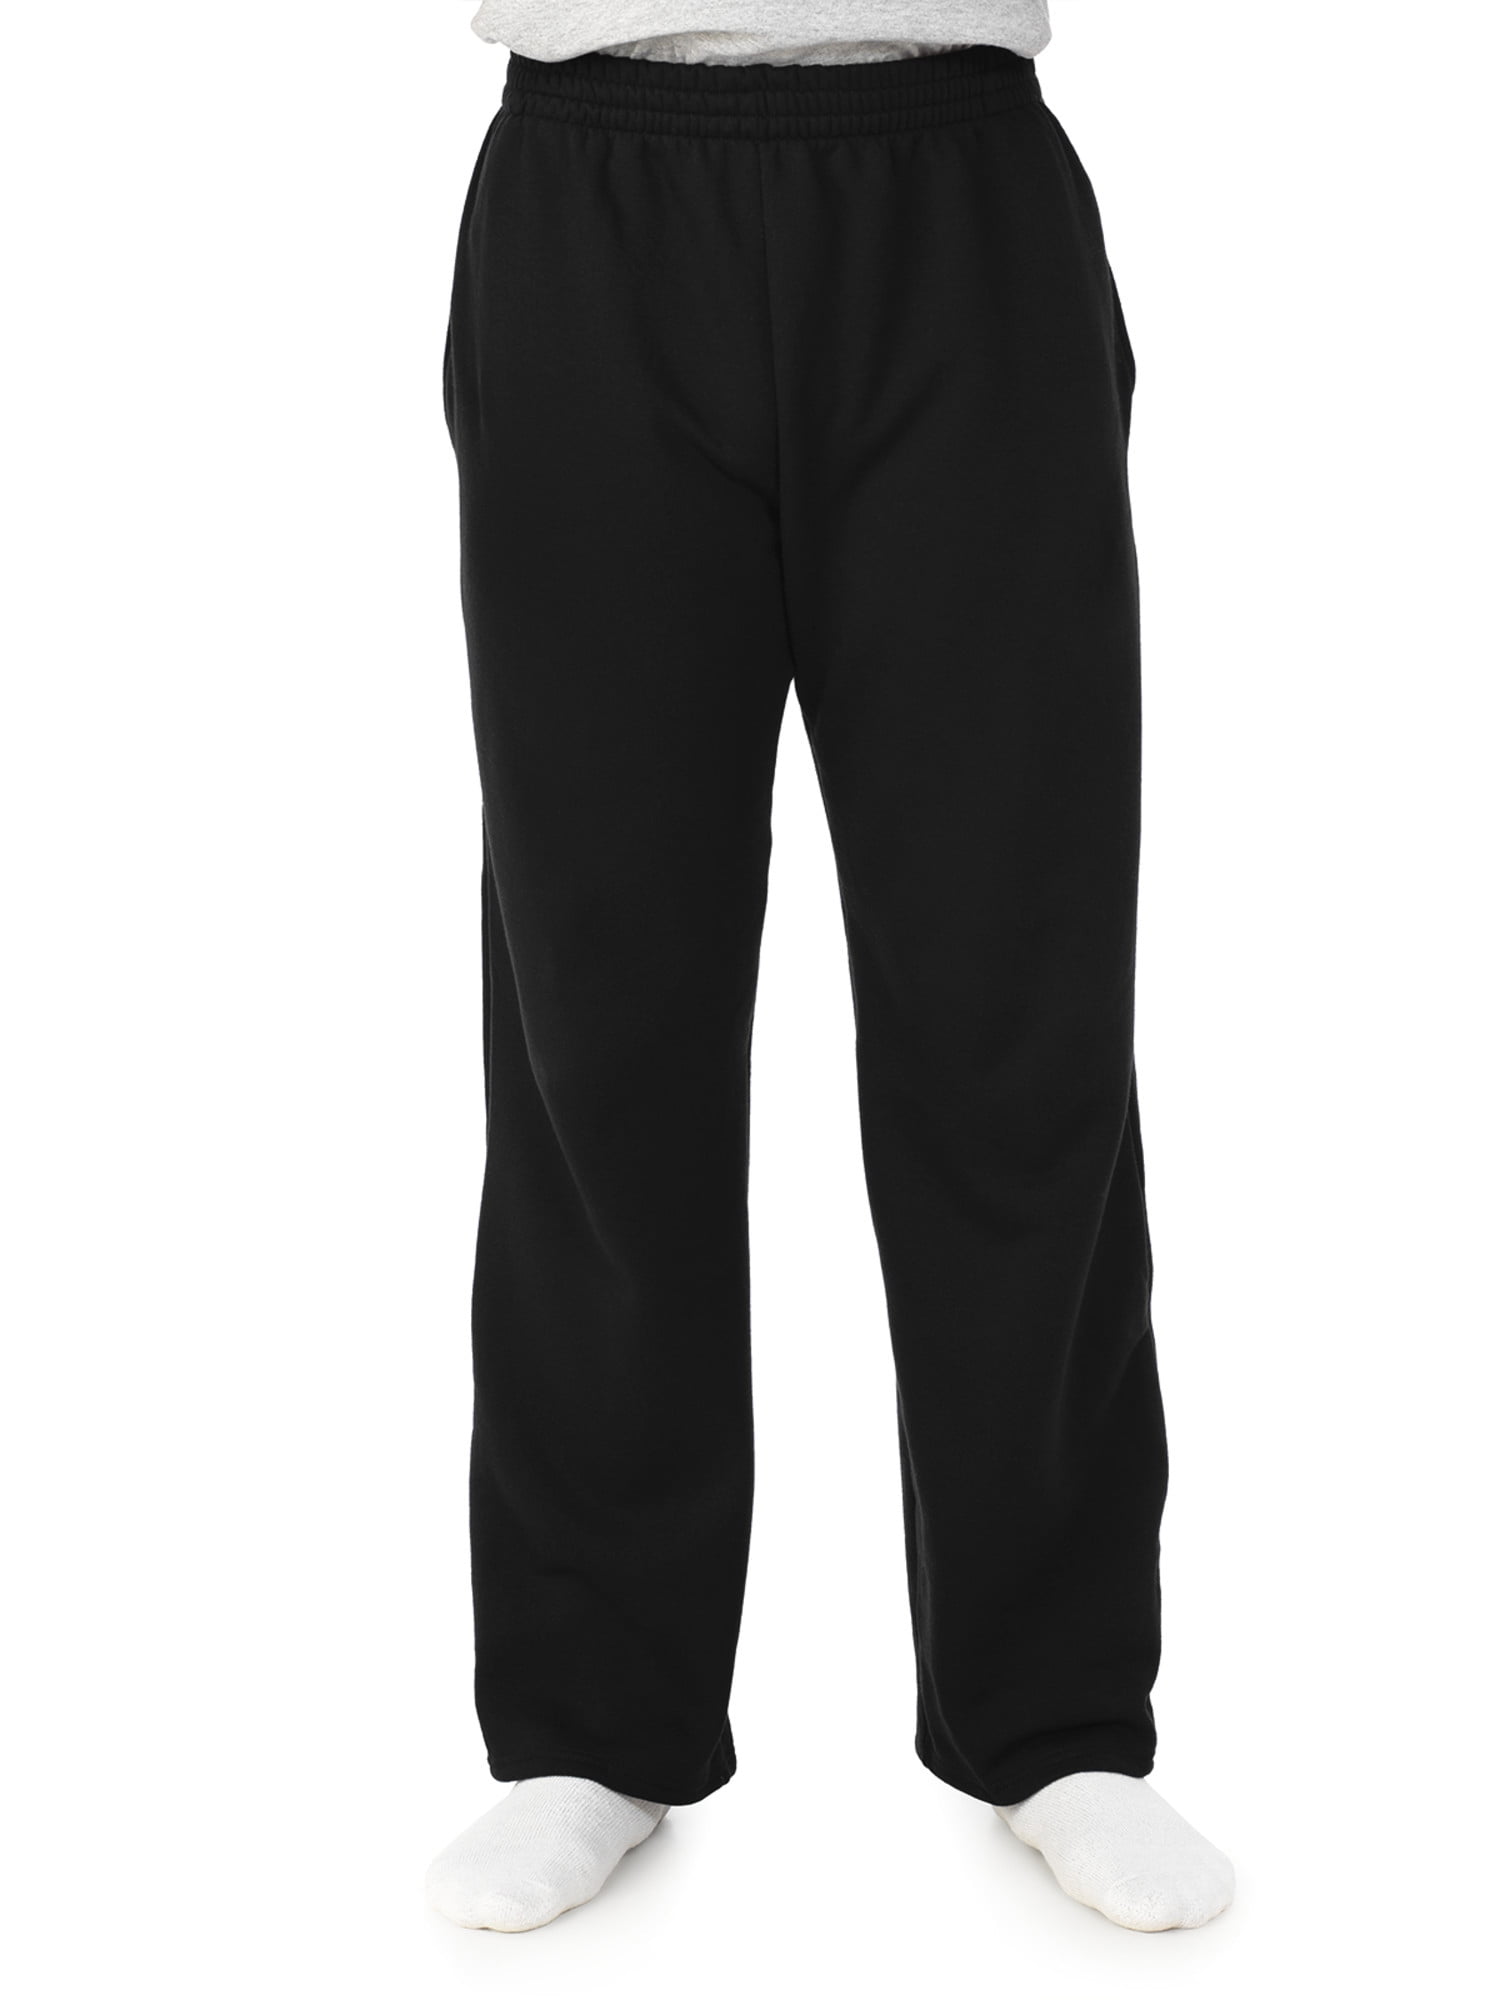 Fruit of the Loom Mens Big and Tall Pocketed Open Bottom Sweatpants